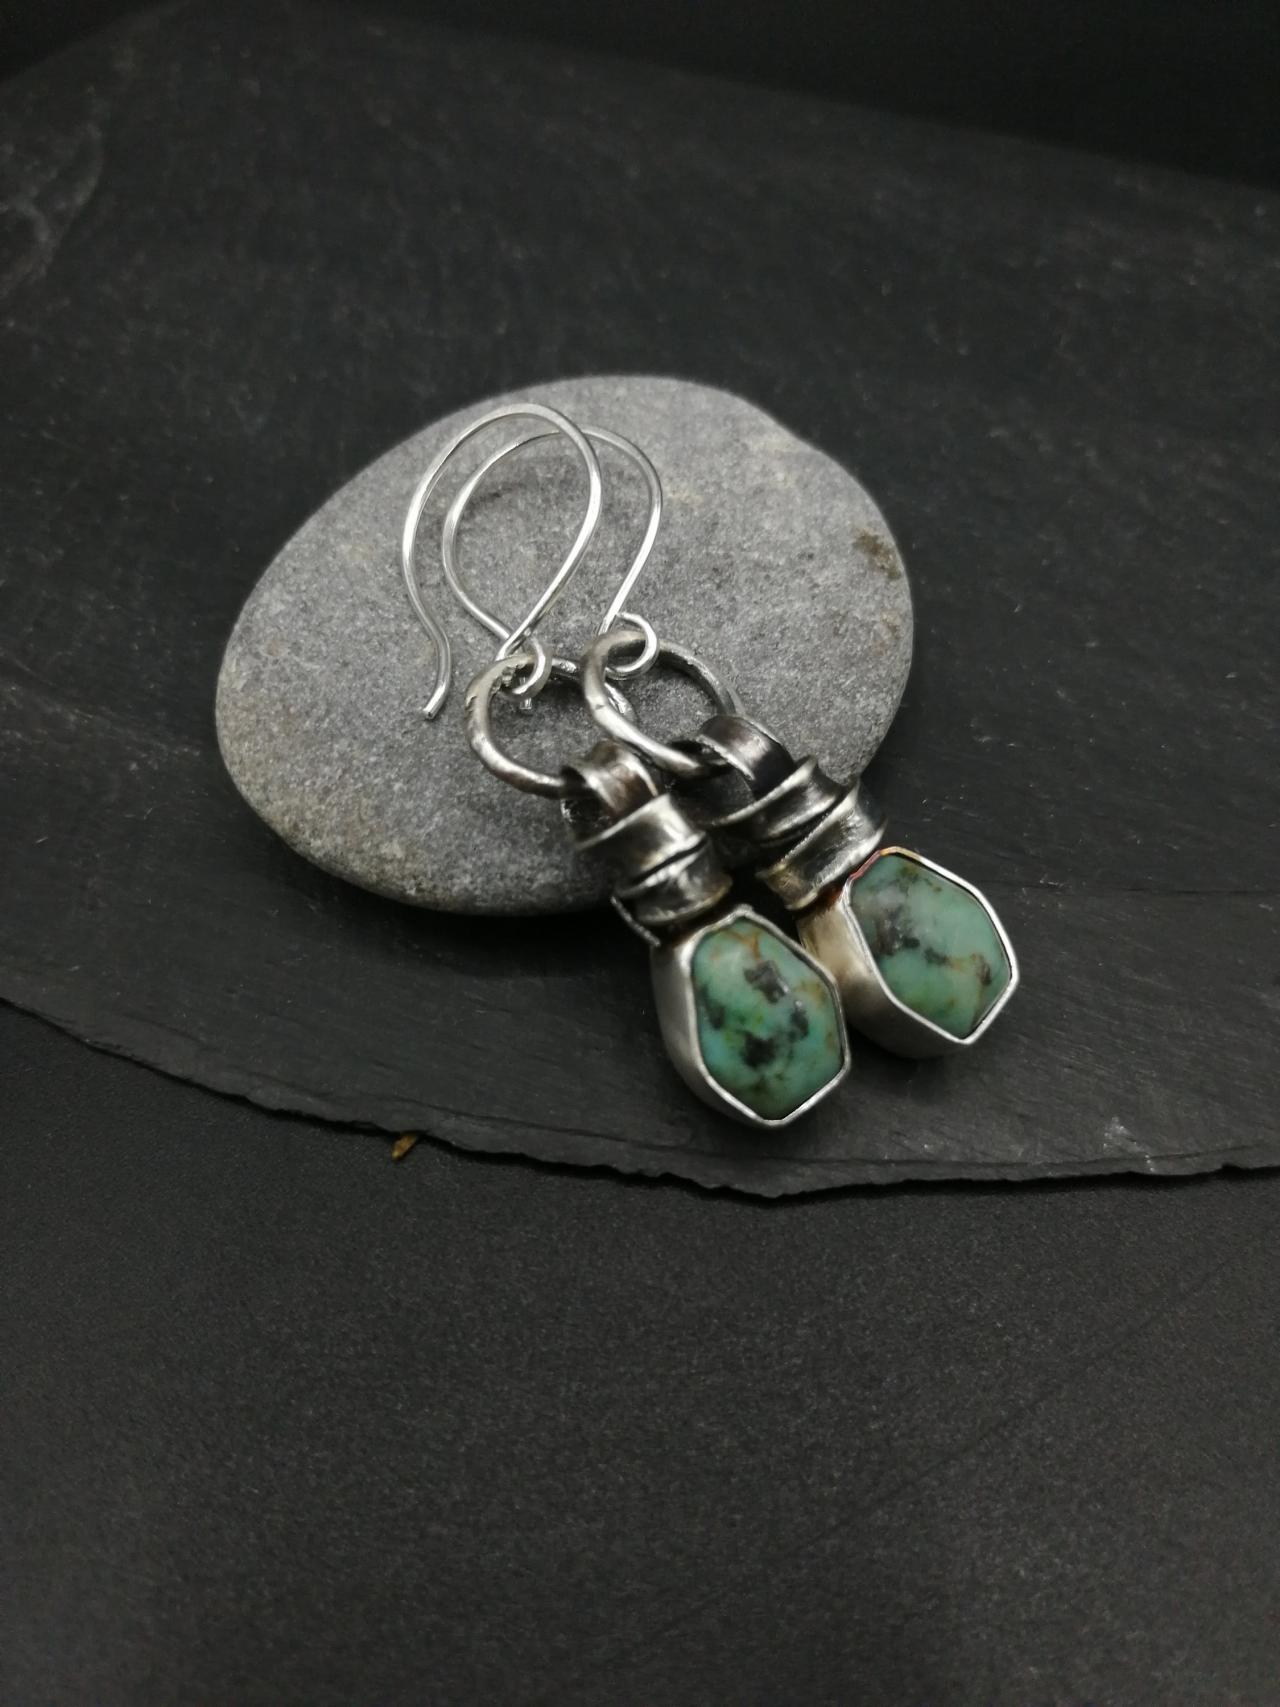 Boho Sweet Green Turquoise And Oxidized Raw Recycled Sterling Silver Drop Earrings Natural Gemstones Zen Rough Wabi Sabi Fun Unique Design